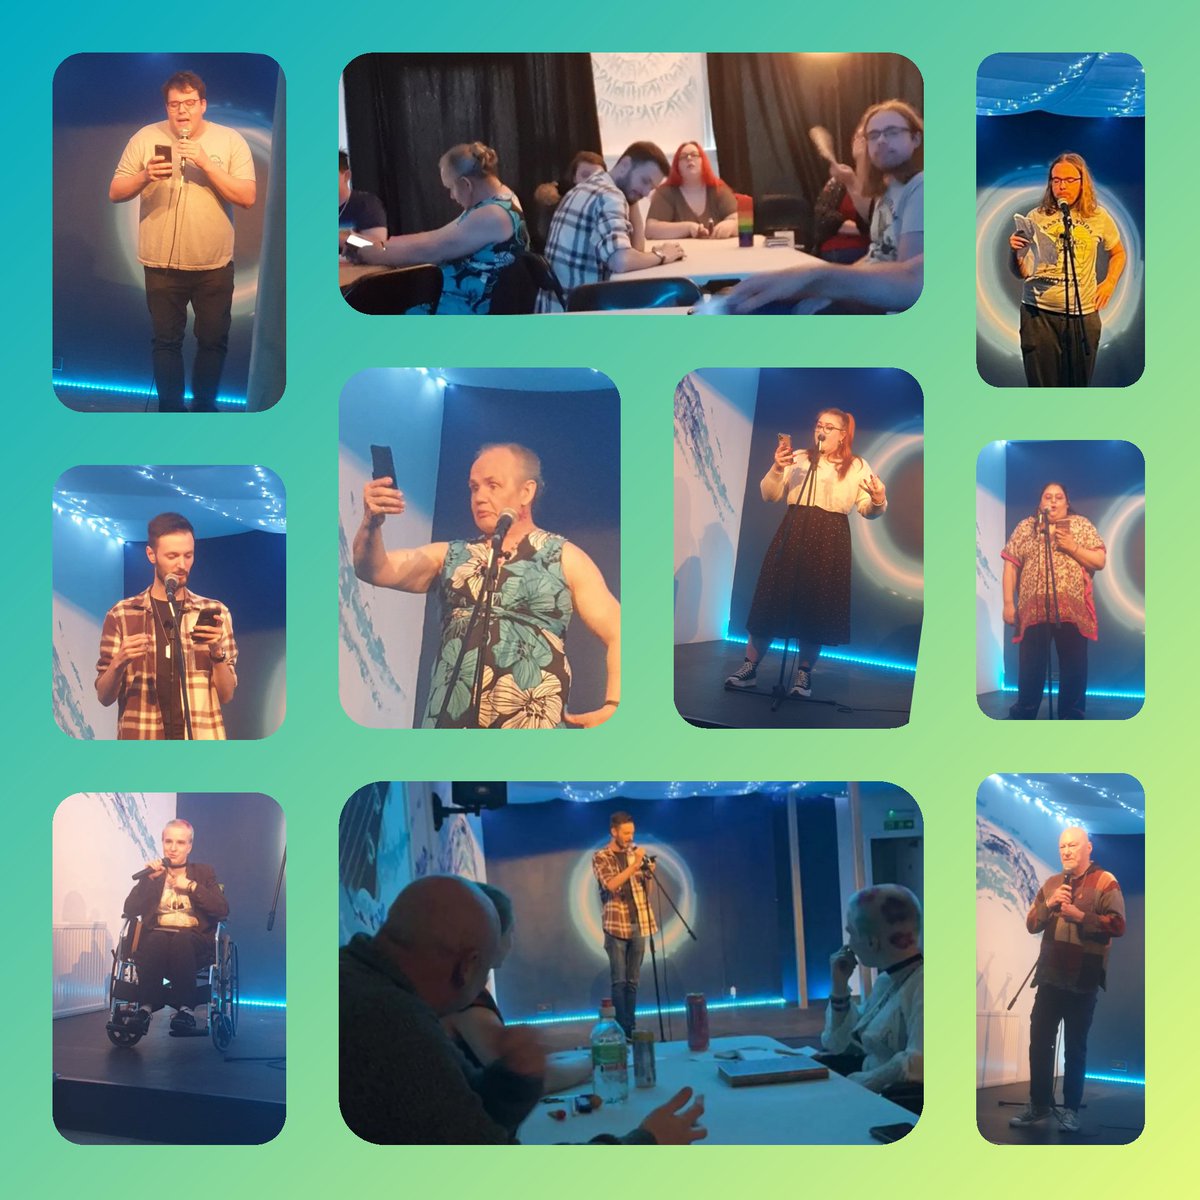 Another great night of #spokenword at #headspaceden #bolton Beautiful, truly diverse voices in a warm welcoming chilled environment. Once again we had a full audience. Huge thanks to @vineypoet & Ali for hosting. @BoltonCVS #boltonfund @GM_Culture @TNLComFund @AsdaFoundation